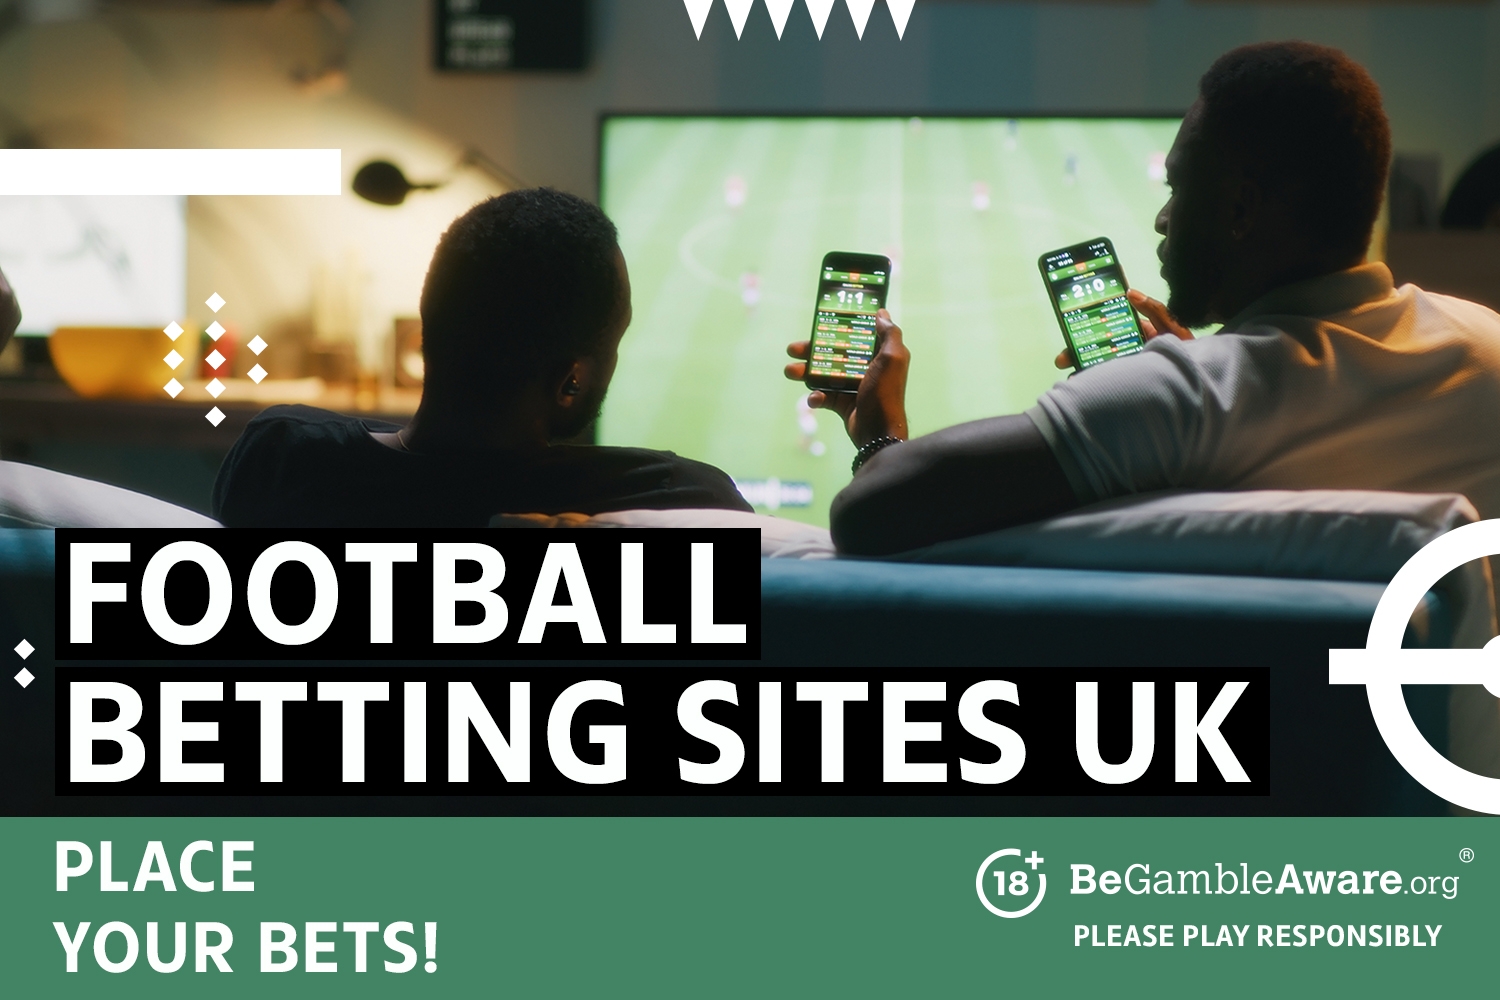 Football betting sites UK - place your bets! 18+ BeGambleAware.org - Please play responsibly